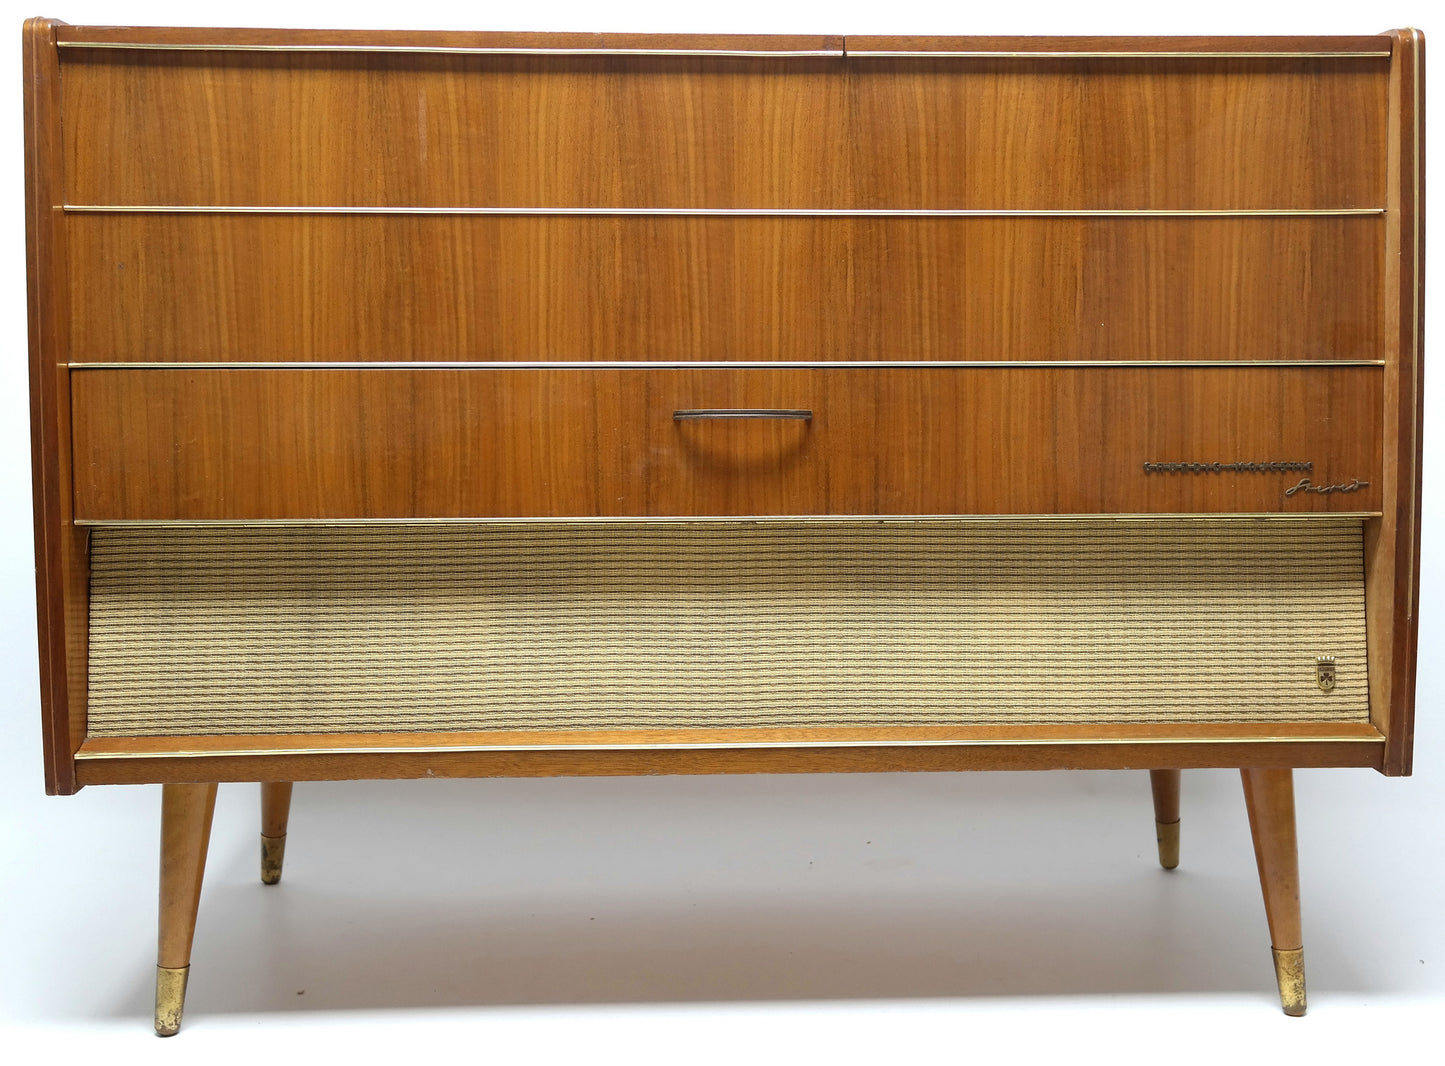 Mid Century Grundig Majestic Stereo Console Record Player - Bluetooth - AM/FM Tuner - Shortwave The Vintedge Co.